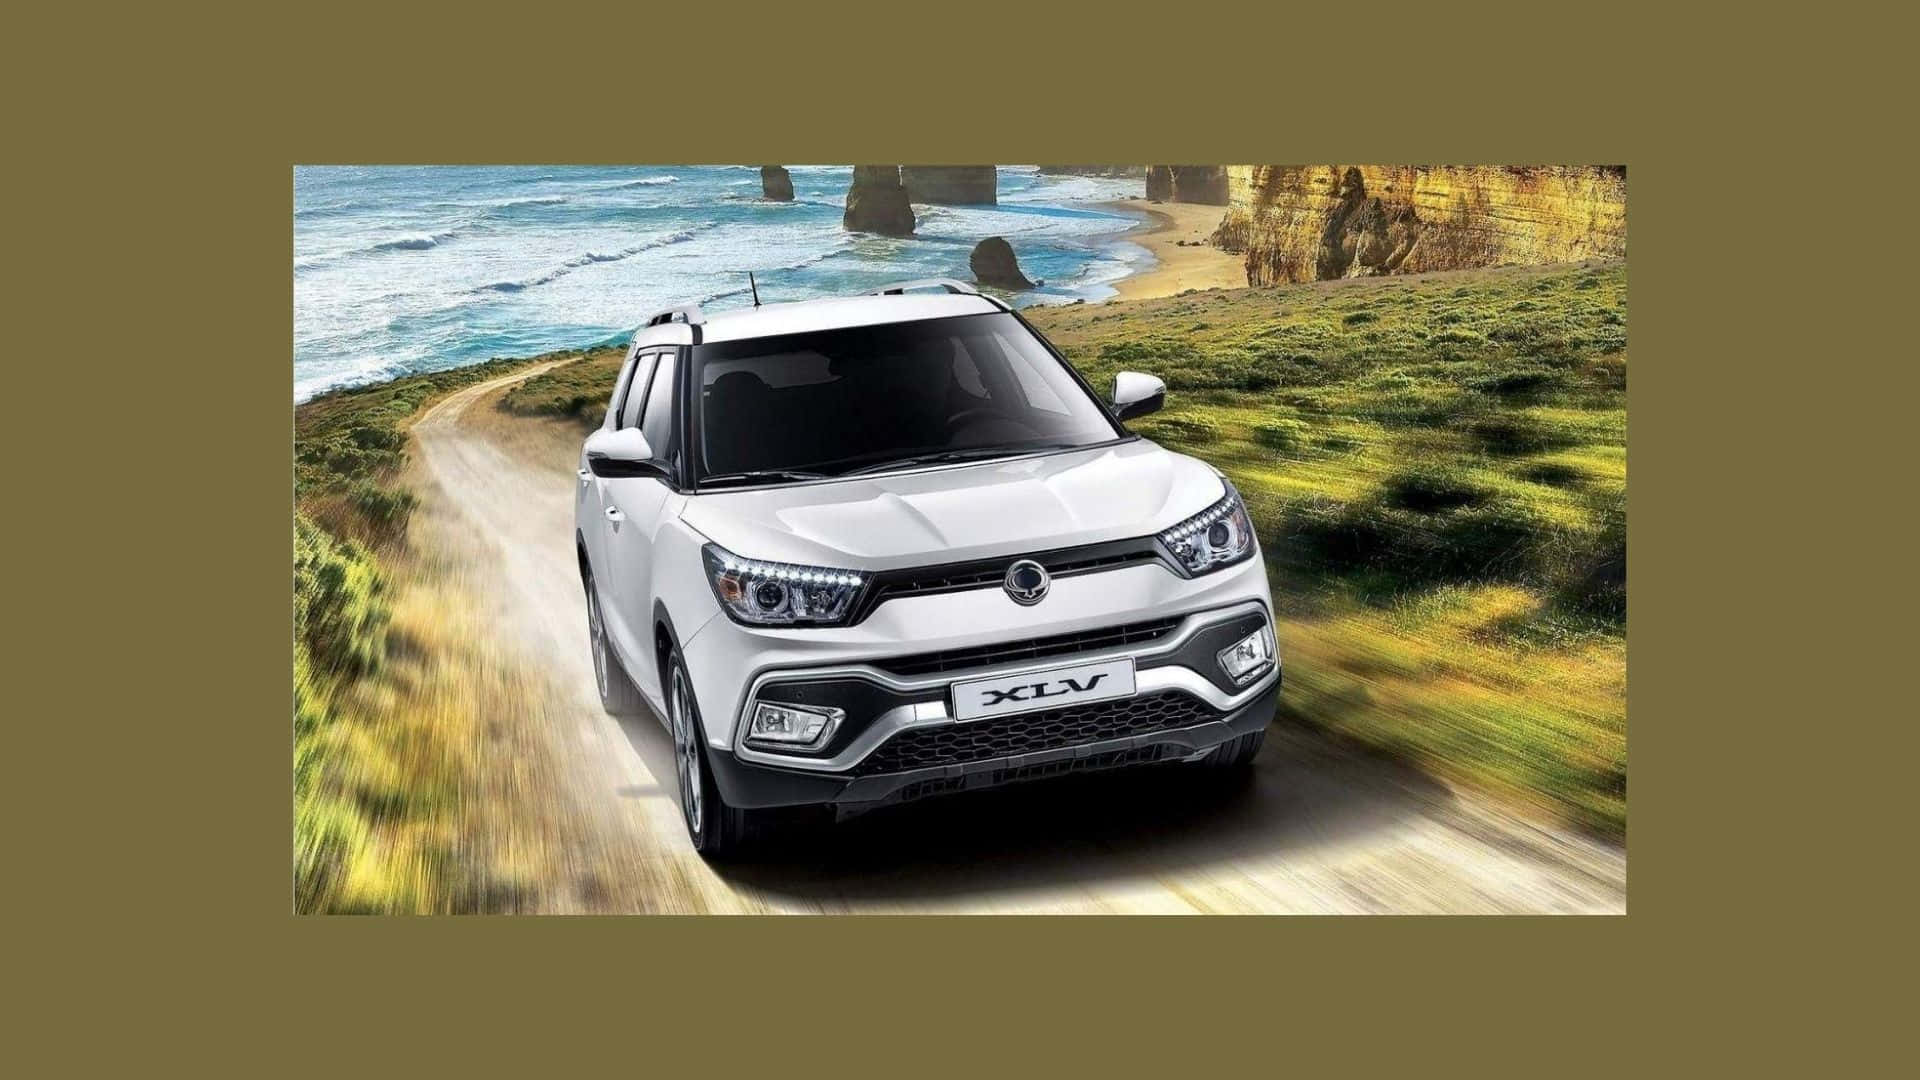 Ssangyong luxury SUV on scenic road Wallpaper